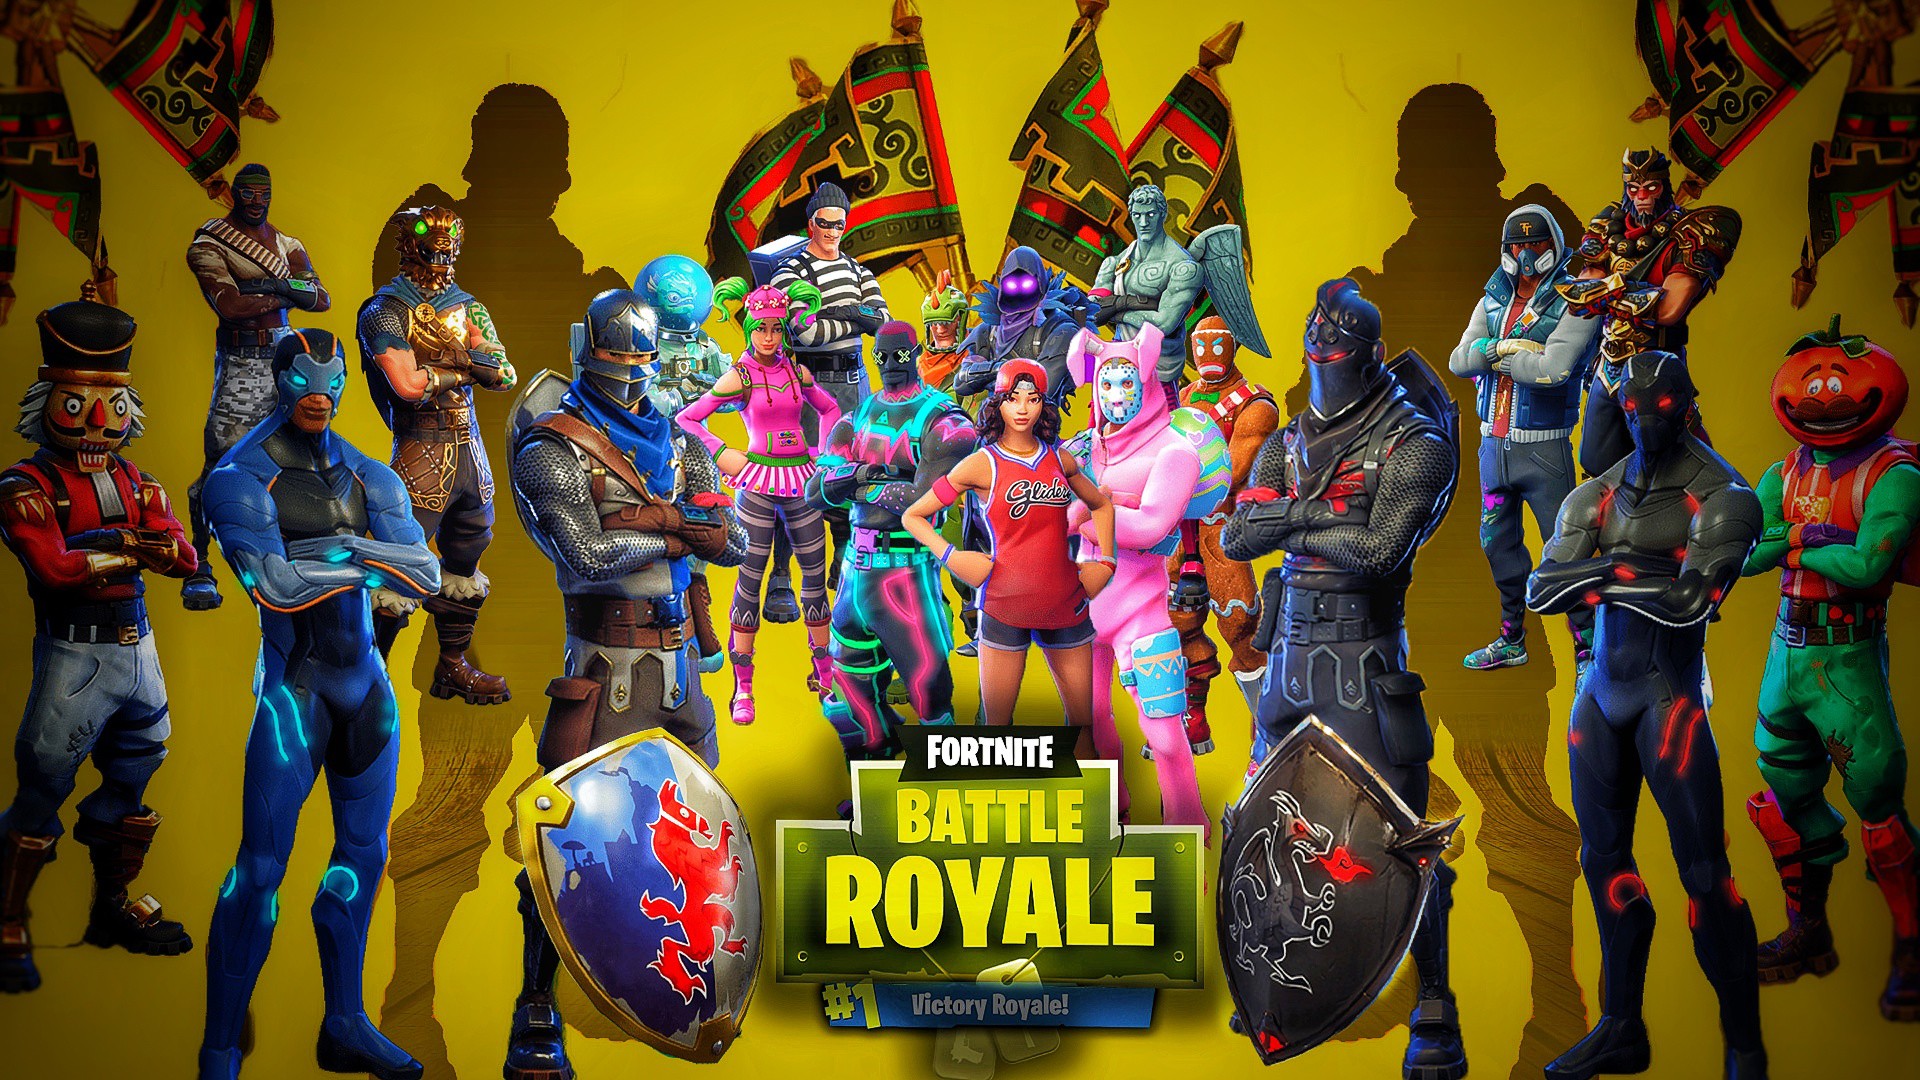 Wallpaper Fortnite with high-resolution 1920x1080 pixel. You can use this wallpaper for your Windows and Mac OS computers as well as your Android and iPhone smartphones